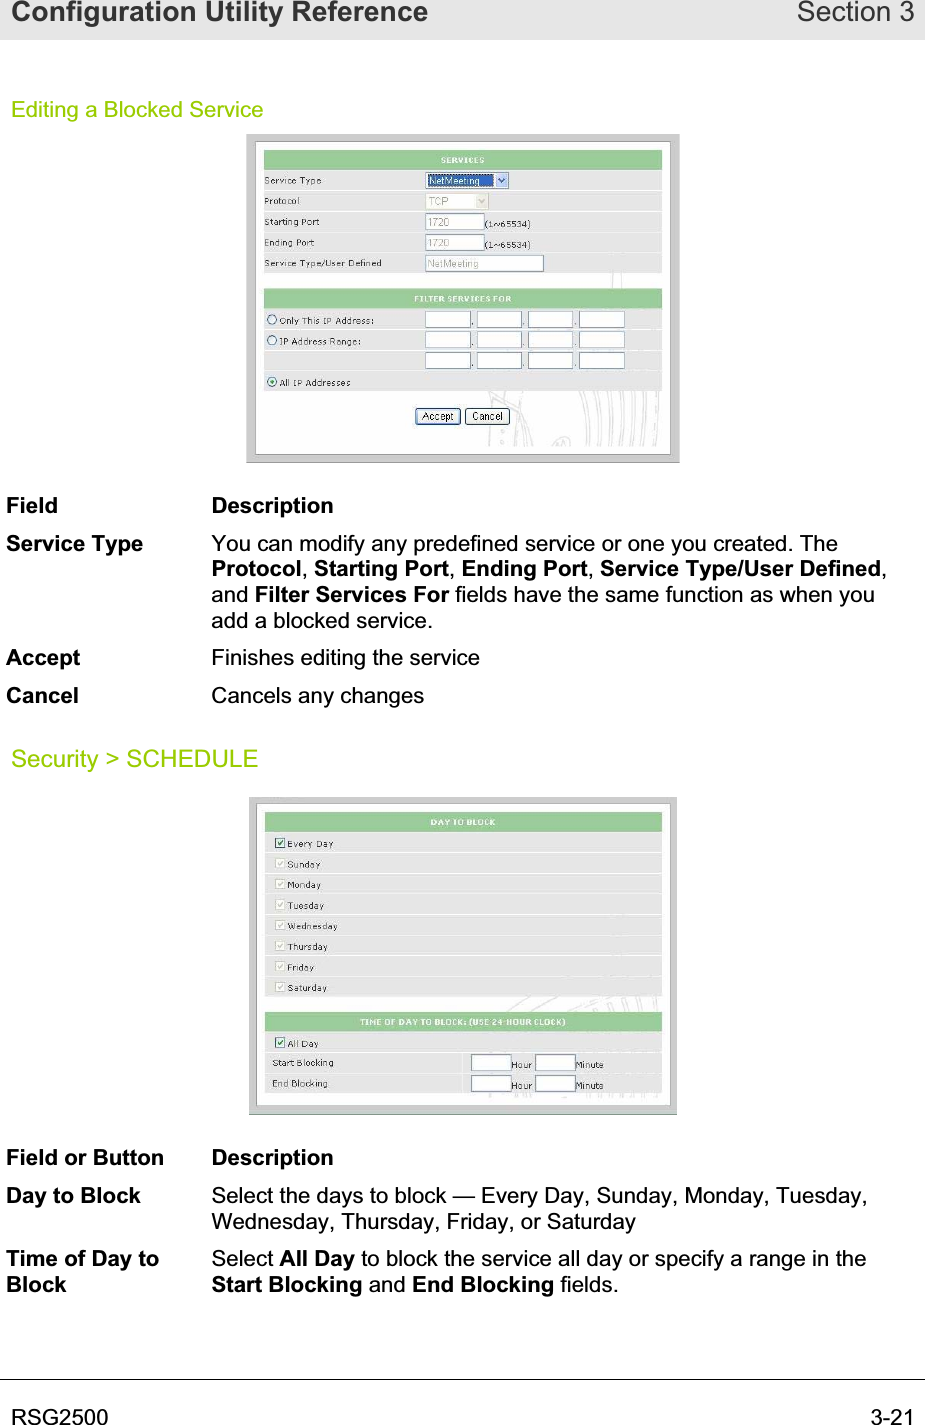 Configuration Utility Reference Section 3RSG2500  3-21Editing a Blocked Service Field Description Service Type  You can modify any predefined service or one you created. The Protocol,Starting Port,Ending Port,Service Type/User Defined,and Filter Services For fields have the same function as when you add a blocked service. Accept Finishes editing the service Cancel Cancels any changes Security &gt; SCHEDULE Field or Button  Description Day to Block  Select the days to block — Every Day, Sunday, Monday, Tuesday, Wednesday, Thursday, Friday, or SaturdayTime of Day to BlockSelect All Day to block the service all day or specify a range in the Start Blocking and End Blocking fields.